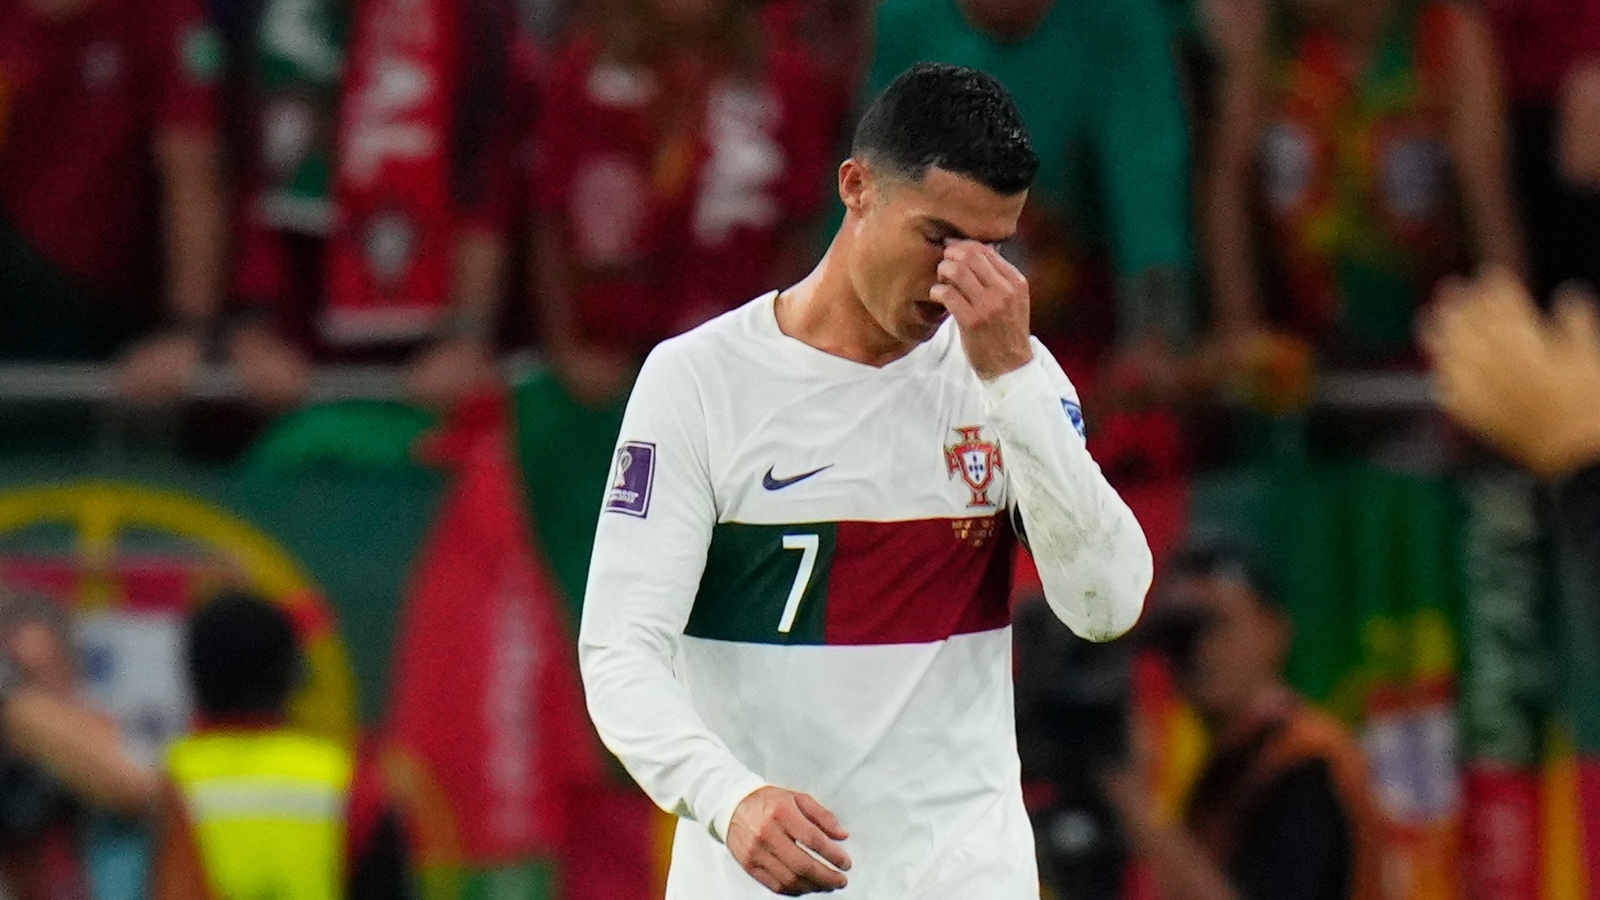 Ronaldo Says His Dream of Winning World Cup Has 'Ended' – NBC 5